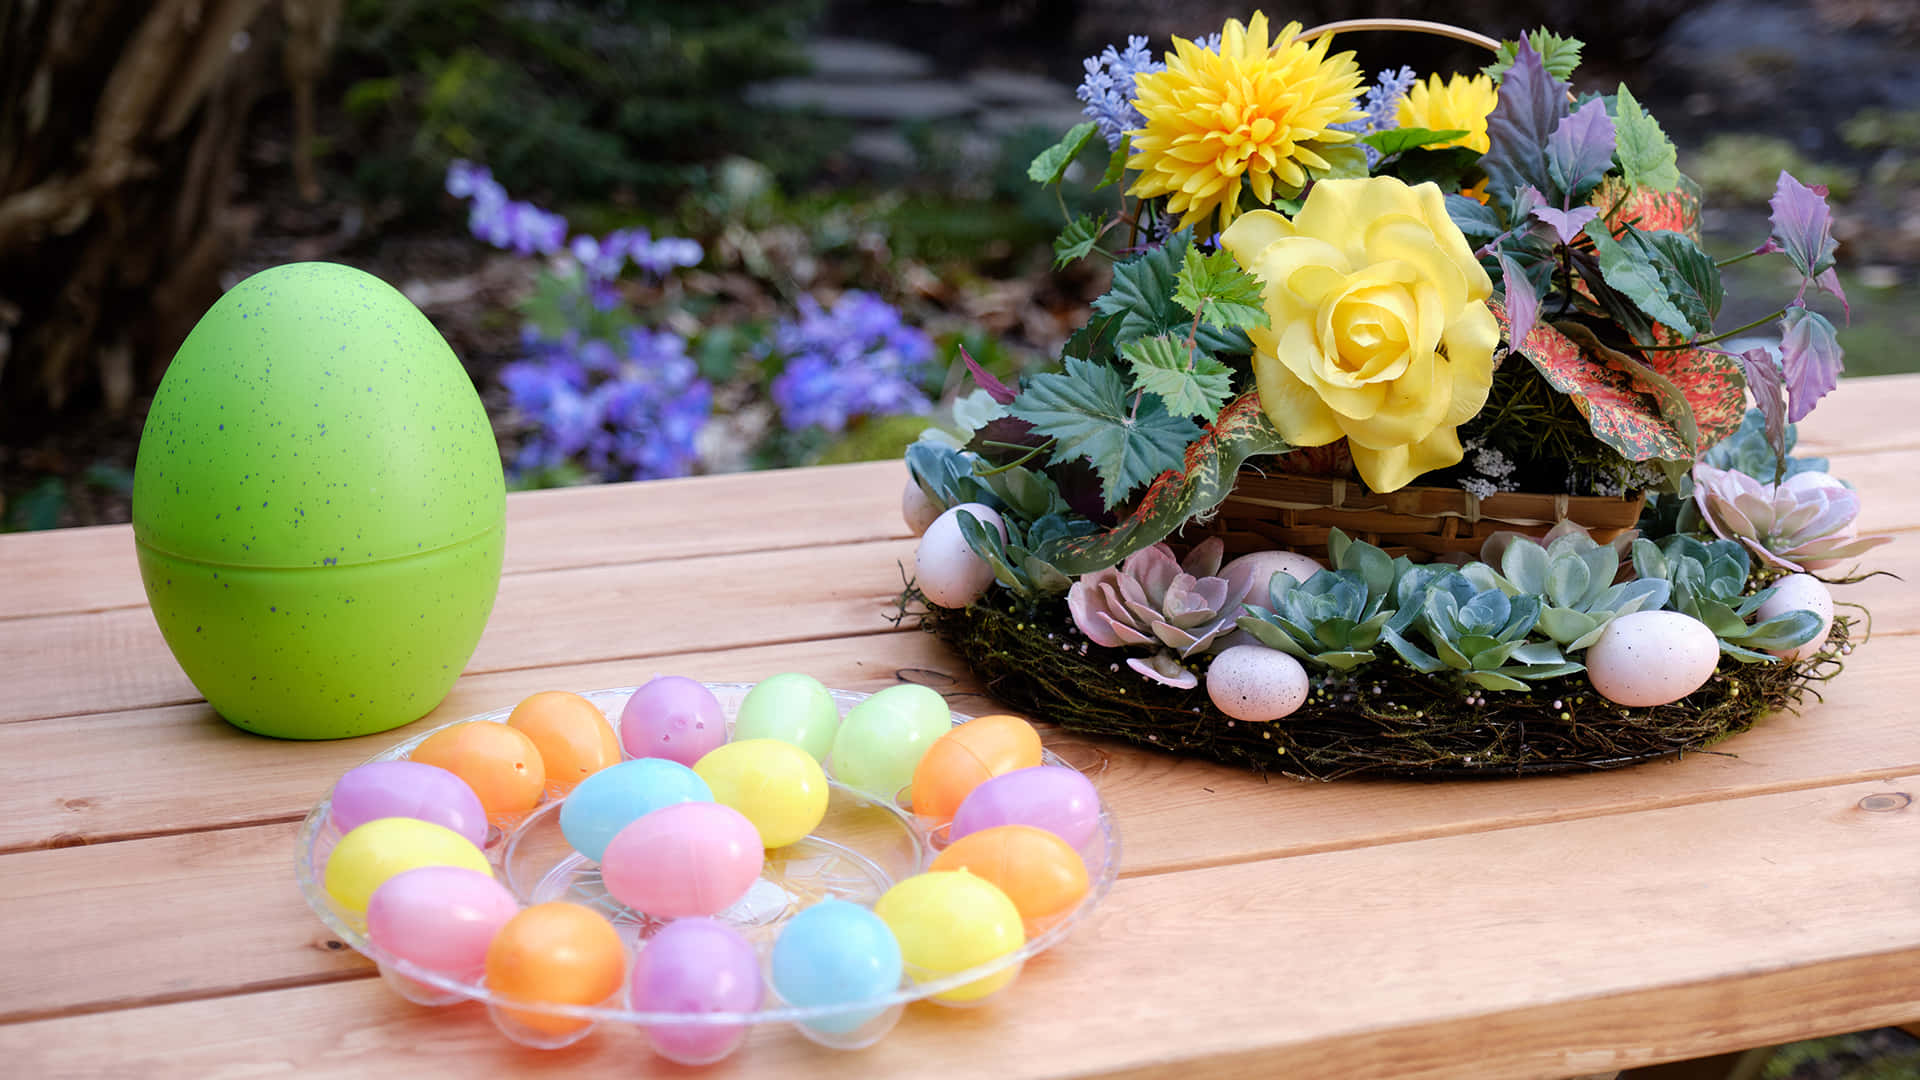 Celebrate Easter with an Online Zoom Meeting